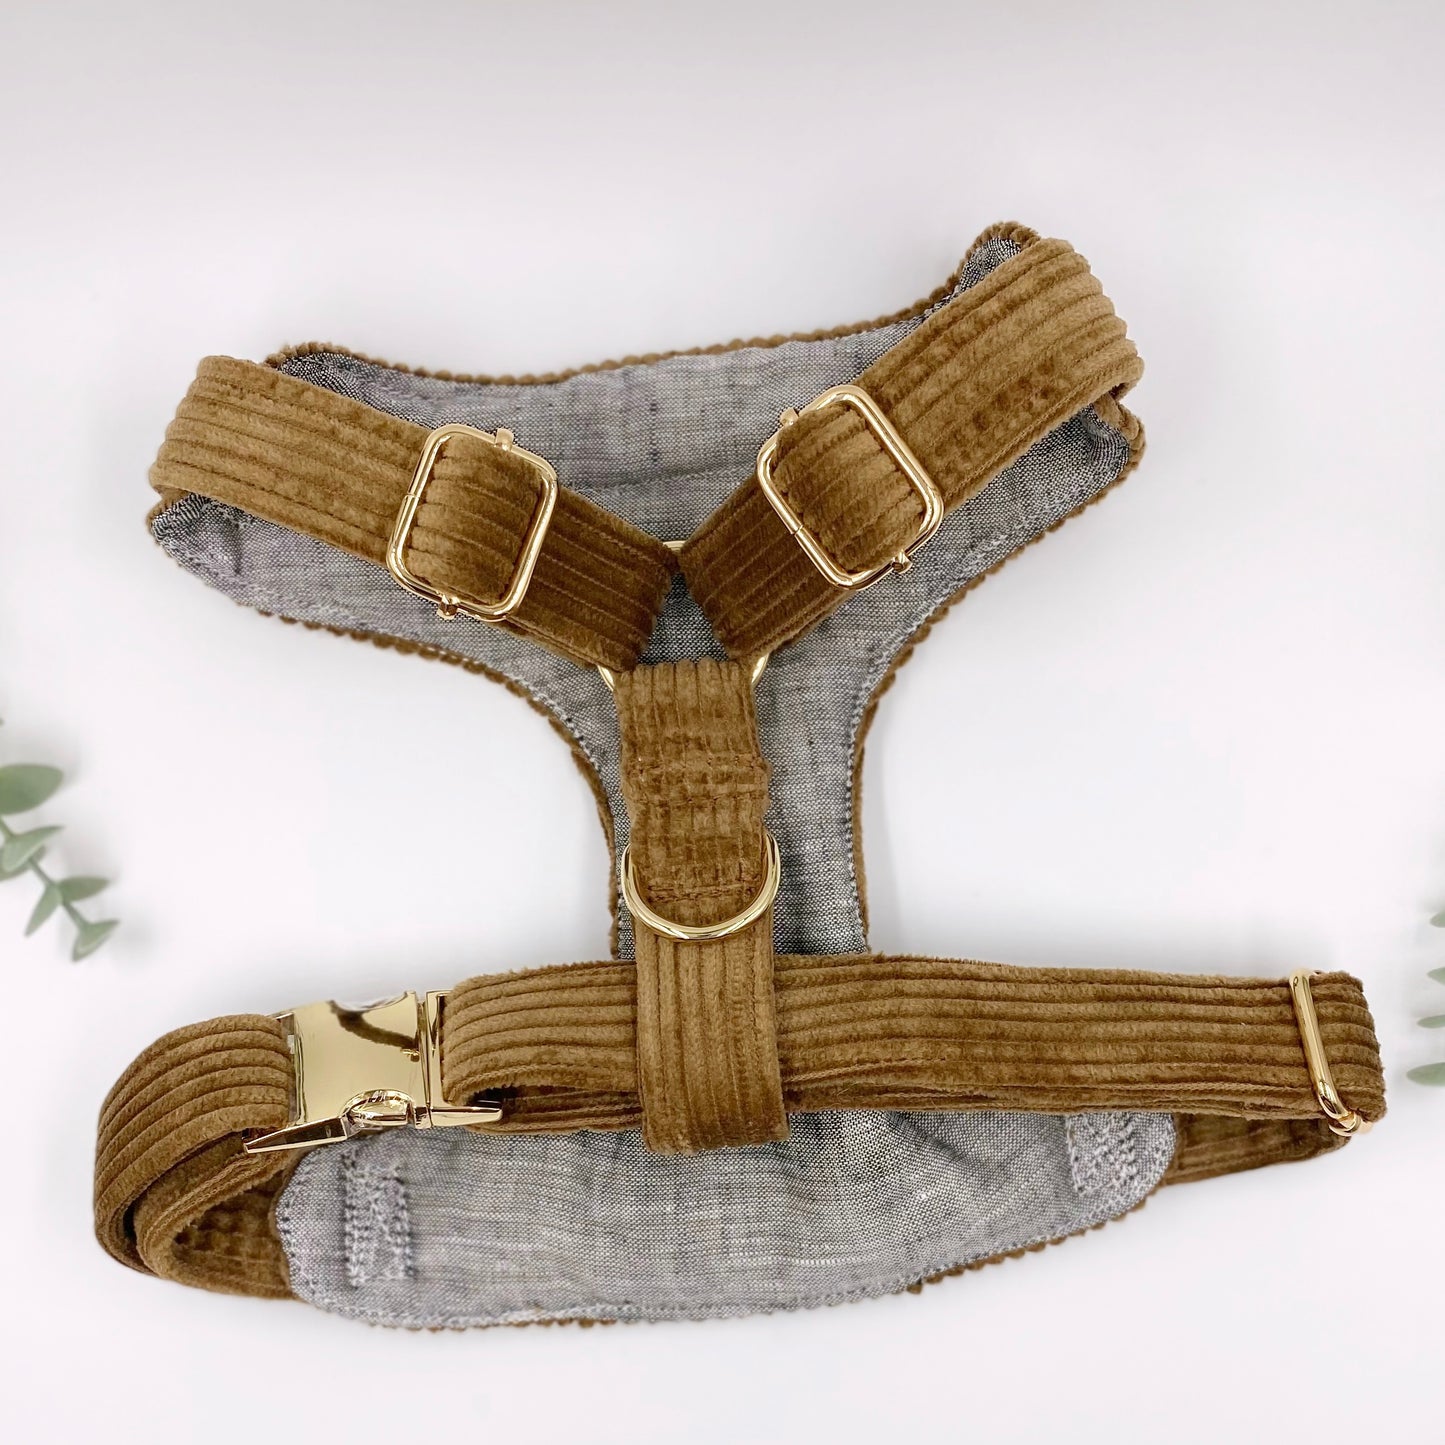 The 'Teddy' Chest Harness Bundle